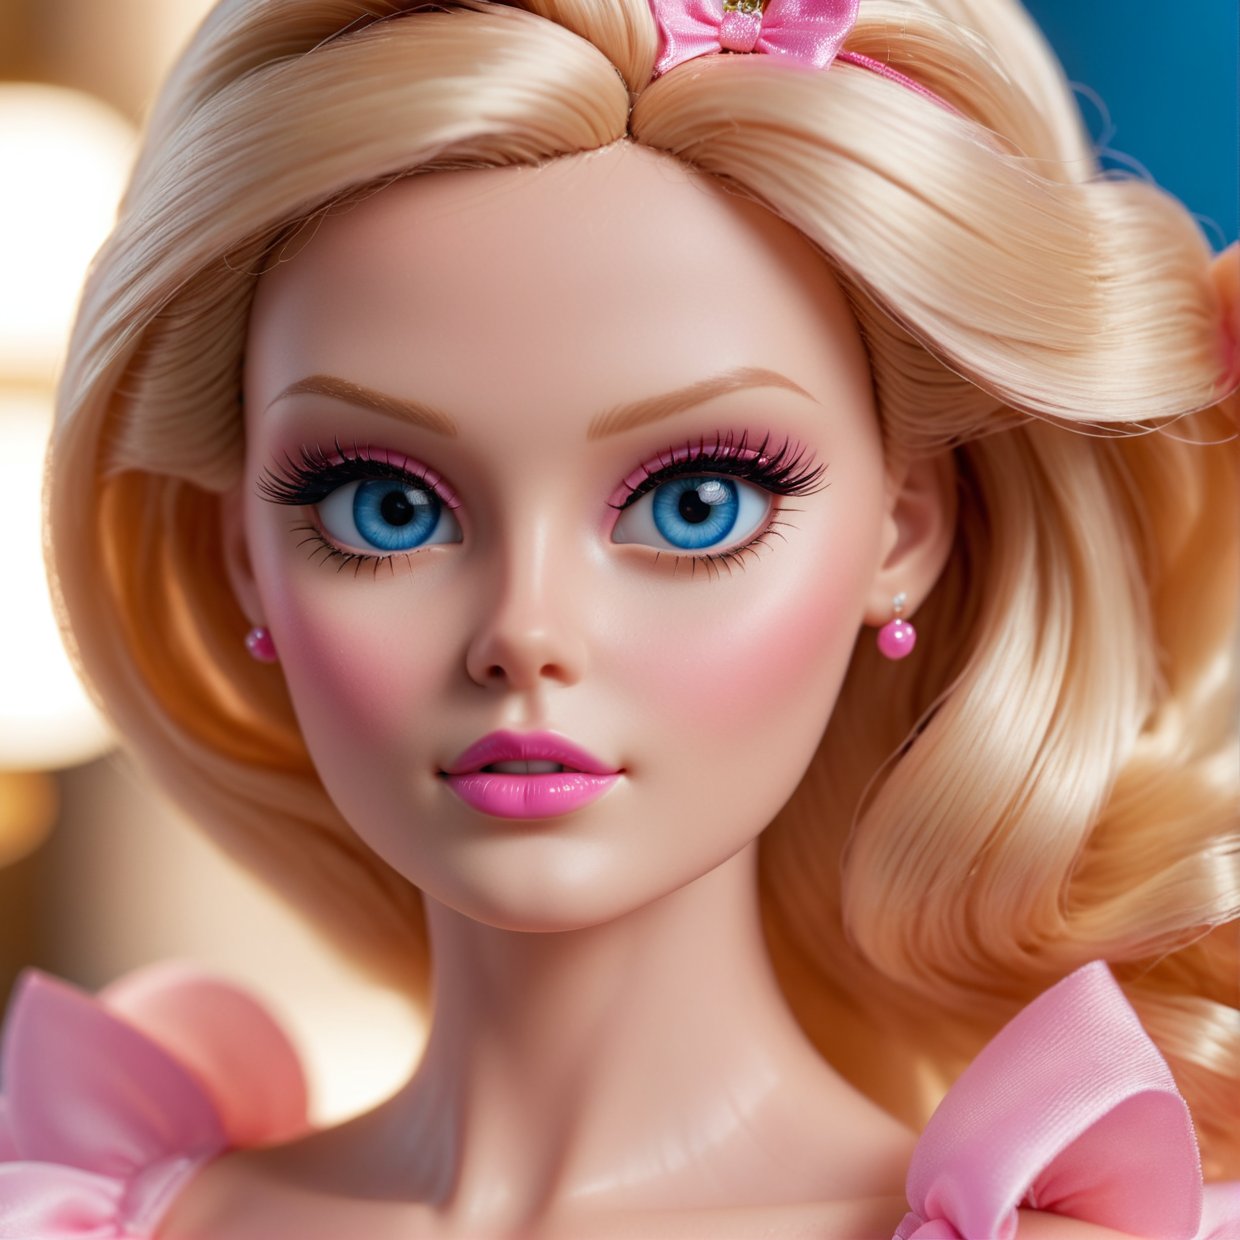 a beautiful barbie doll, extremely detailed face and features, beautiful blue eyes, cute pink lips, long eyelashes, blonde hair, porcelain skin, wearing a pink tutu dress, (best quality,4k,8k,highres,masterpiece:1.2),ultra-detailed,(realistic,photorealistic,photo-realistic:1.37),intricate details,bright lighting,pastel color palette,soft focus,cinematic composition

